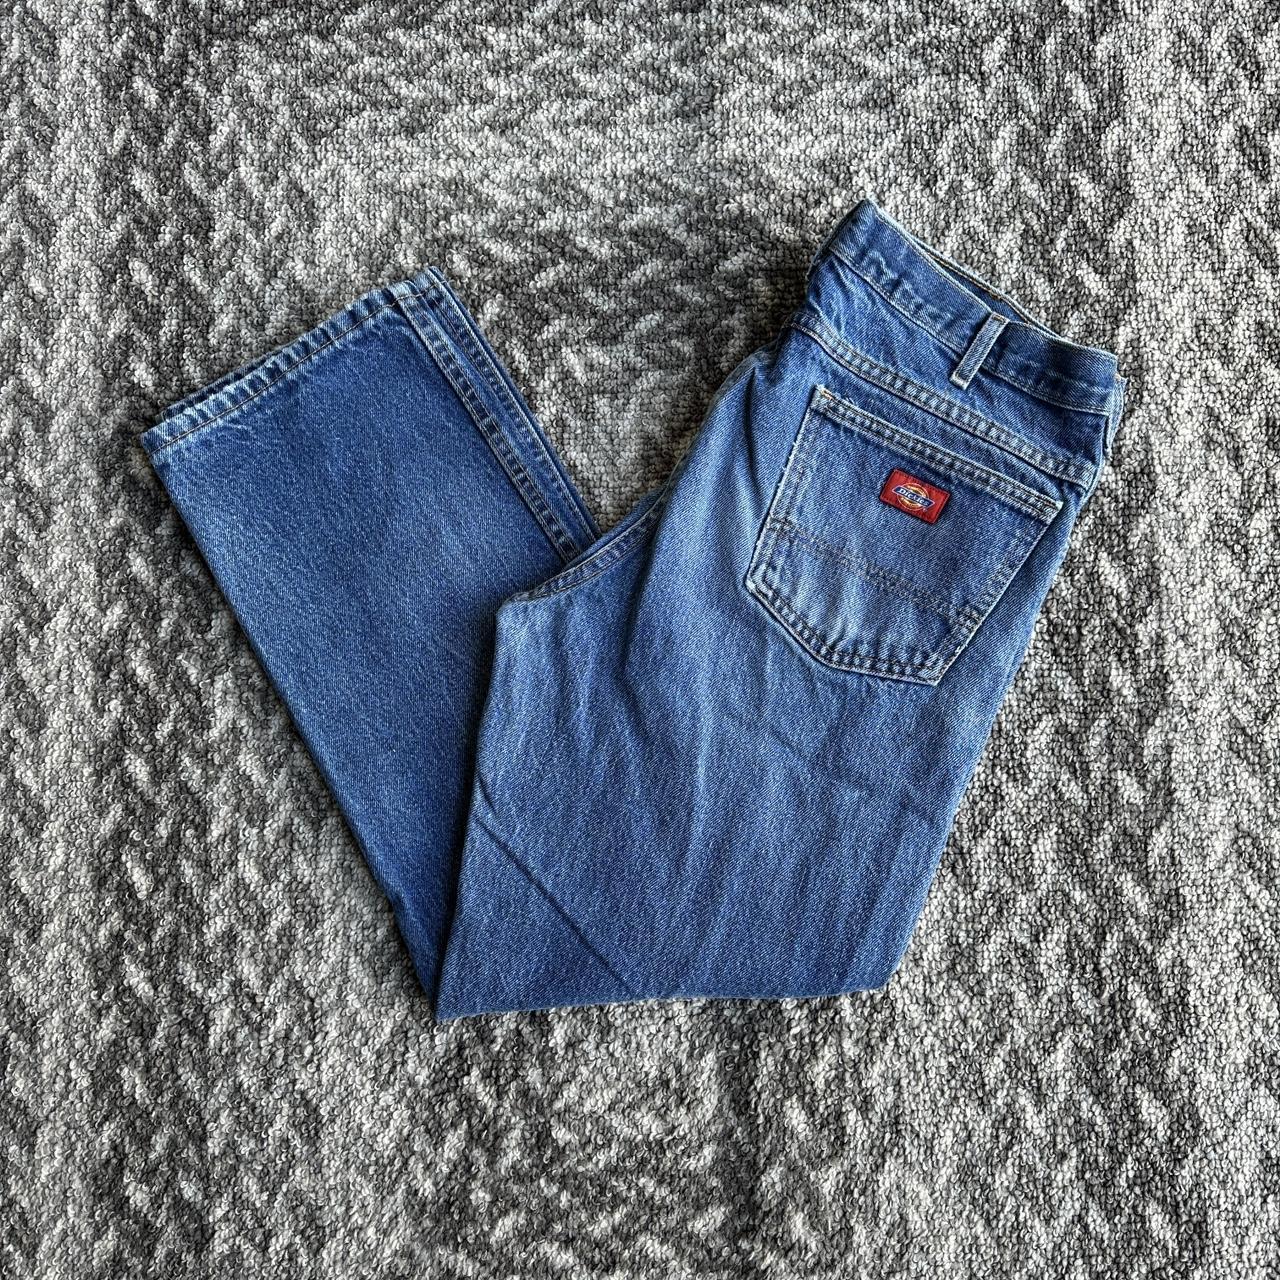 Early 2000s Distressed Faded Dickies Cargo Carpenter... - Depop